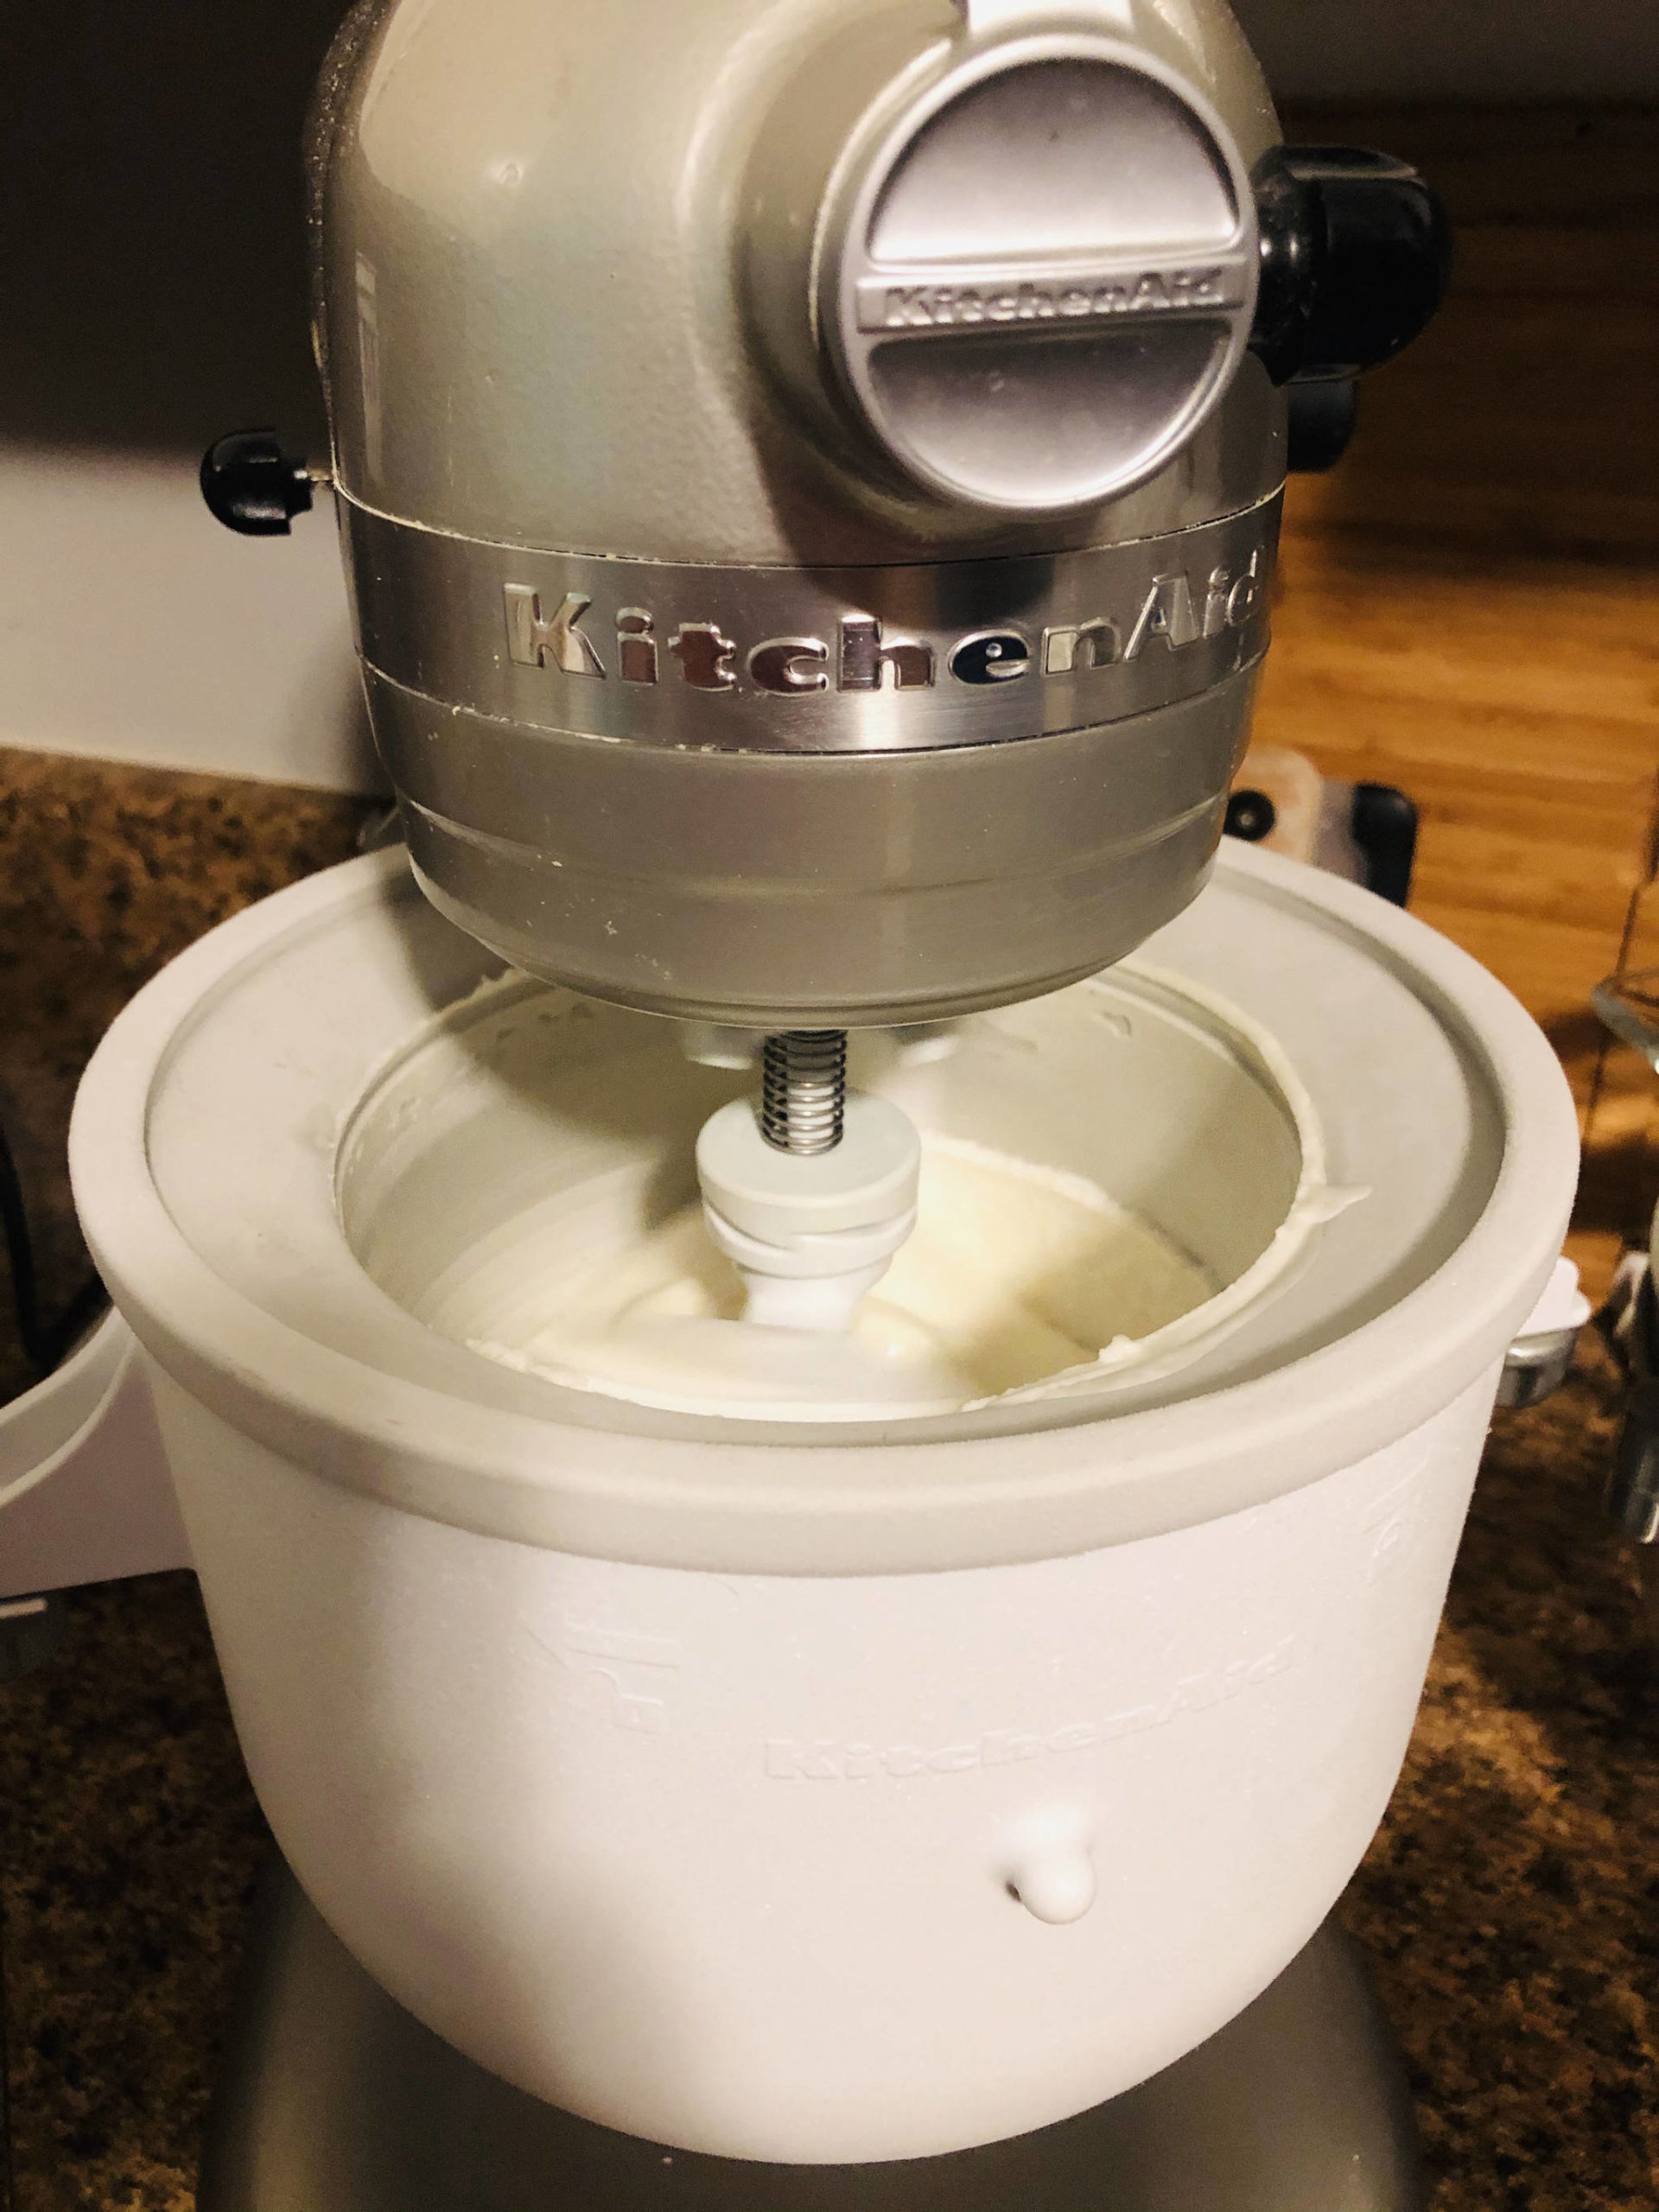 Churning homemade ice cream in our KitchenAid ice cream maker, on Monday, Oct. 5, 2020, in Anchorage, Alaska. (Photo by Victoria Petersen/Peninsula Clarion)